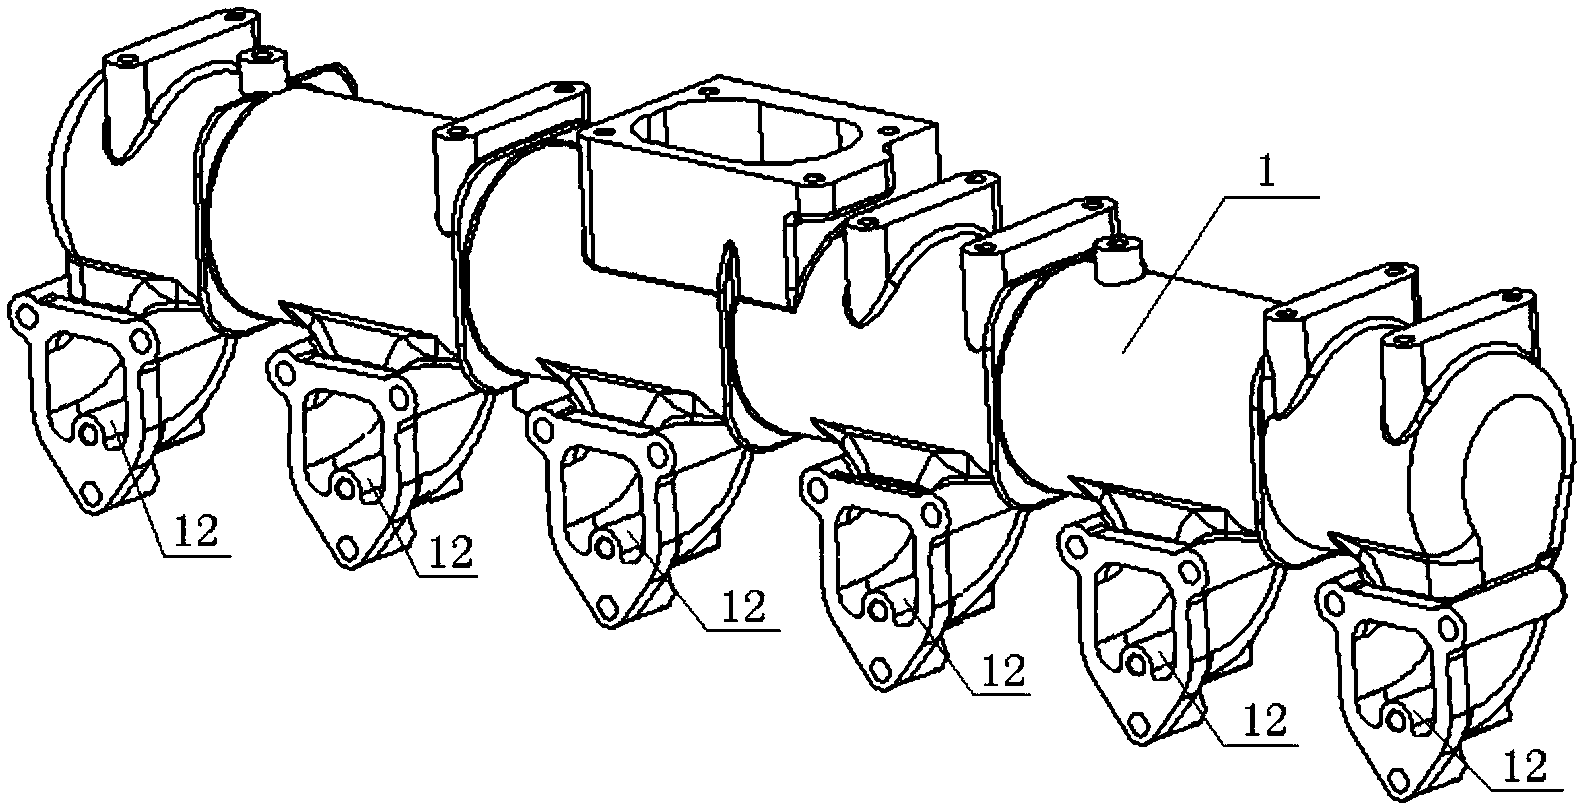 Multi-point injection intake pipe of gas engine